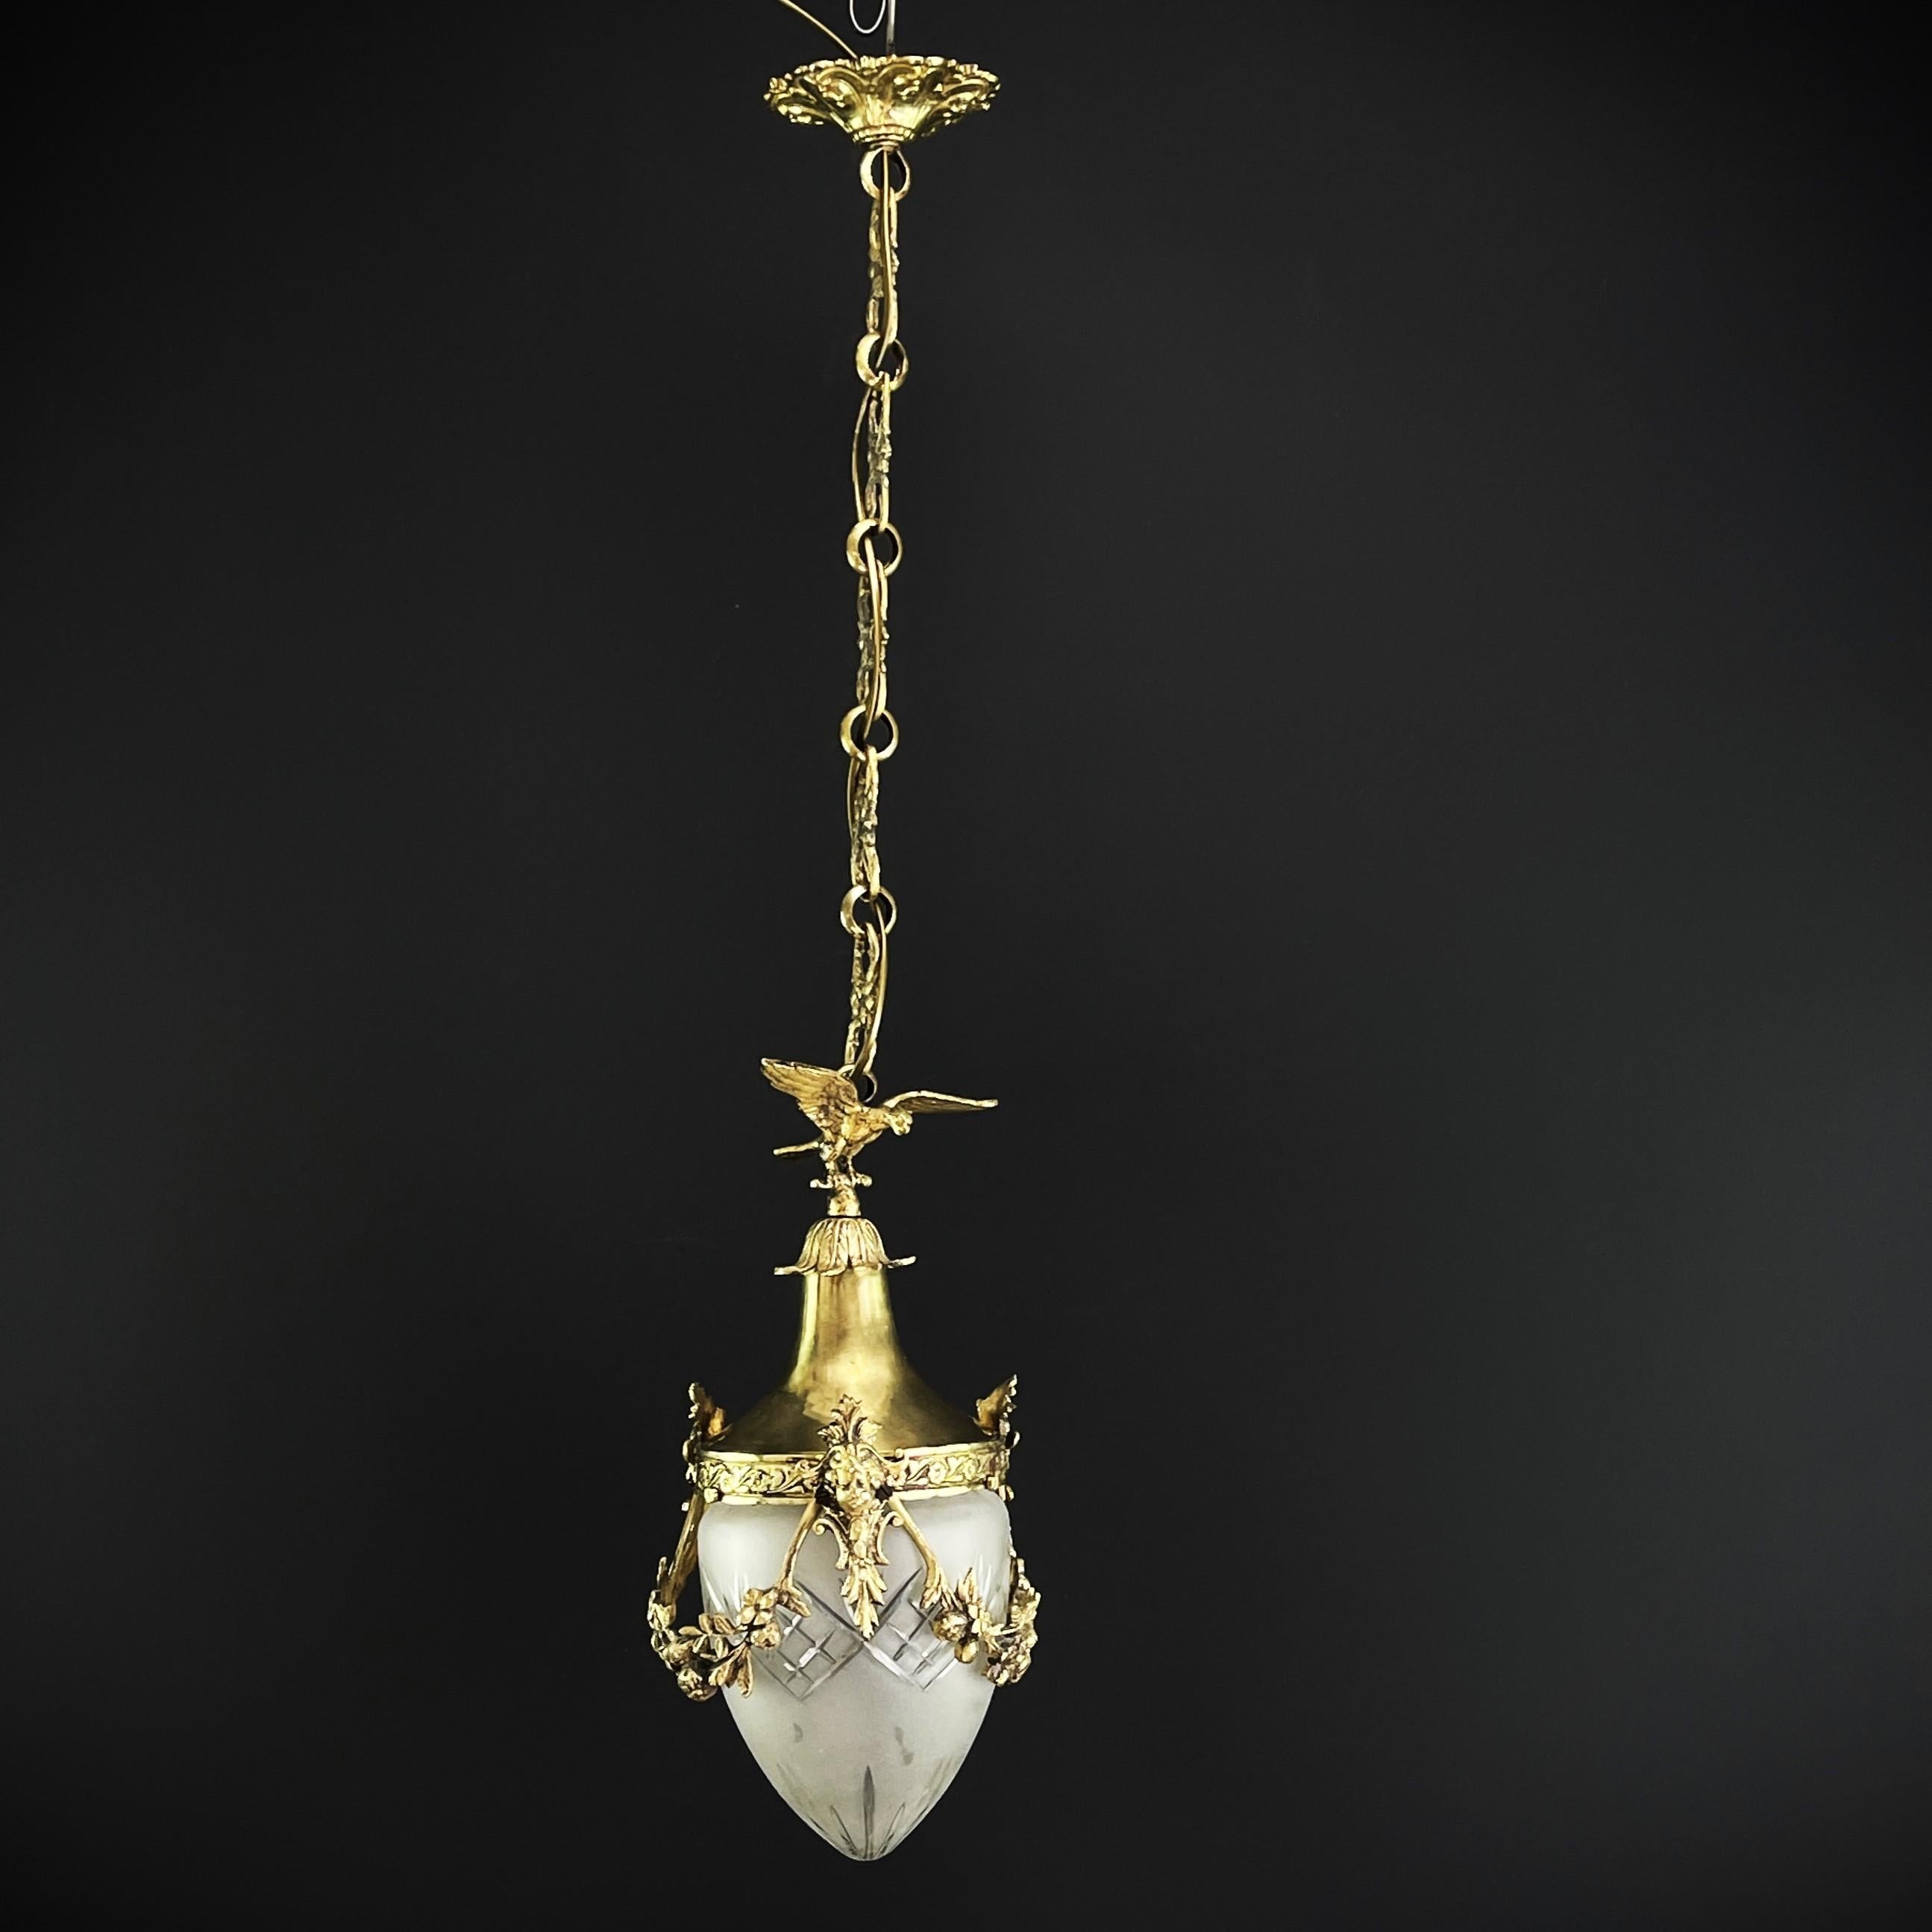 French Art Nouveau hanging lamp bronze with eagle, drop-shaped, 1900s